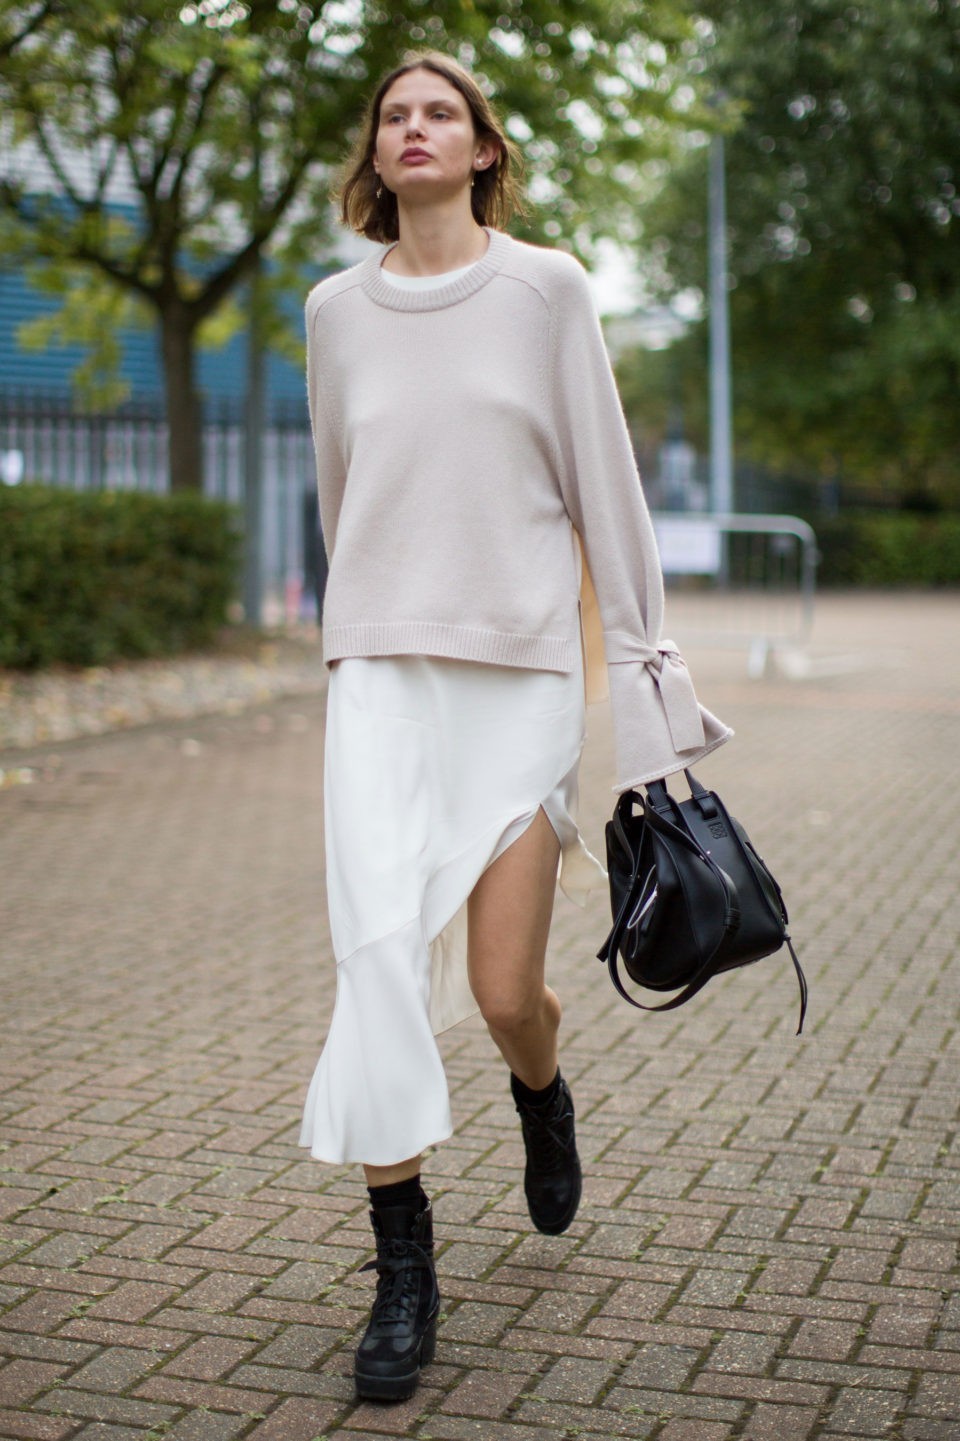 cashmere, statement sleeves, кашемир